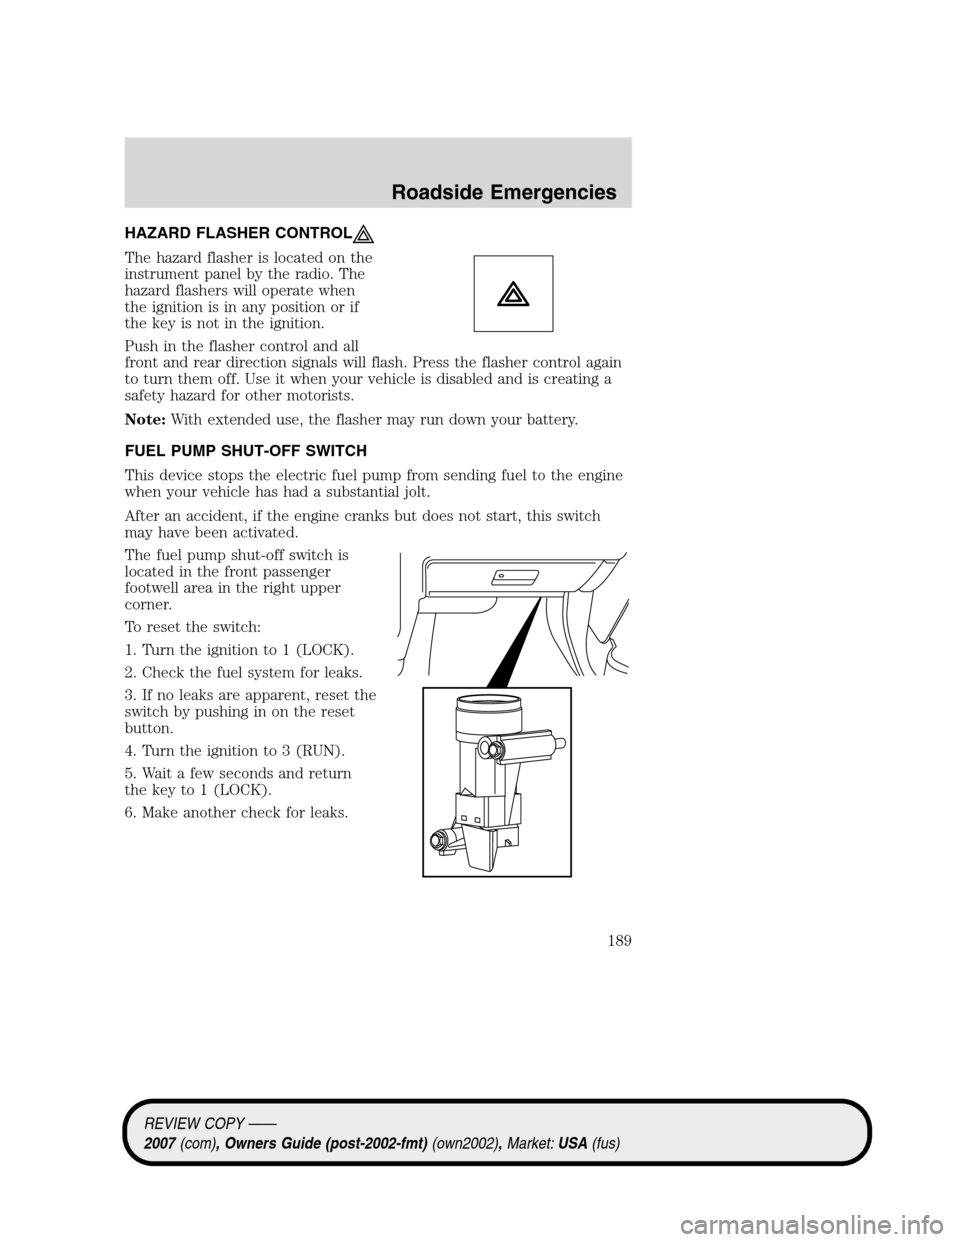 LINCOLN MKZ 2007 User Guide HAZARD FLASHER CONTROL
The hazard flasher is located on the
instrument panel by the radio. The
hazard flashers will operate when
the ignition is in any position or if
the key is not in the ignition.
P